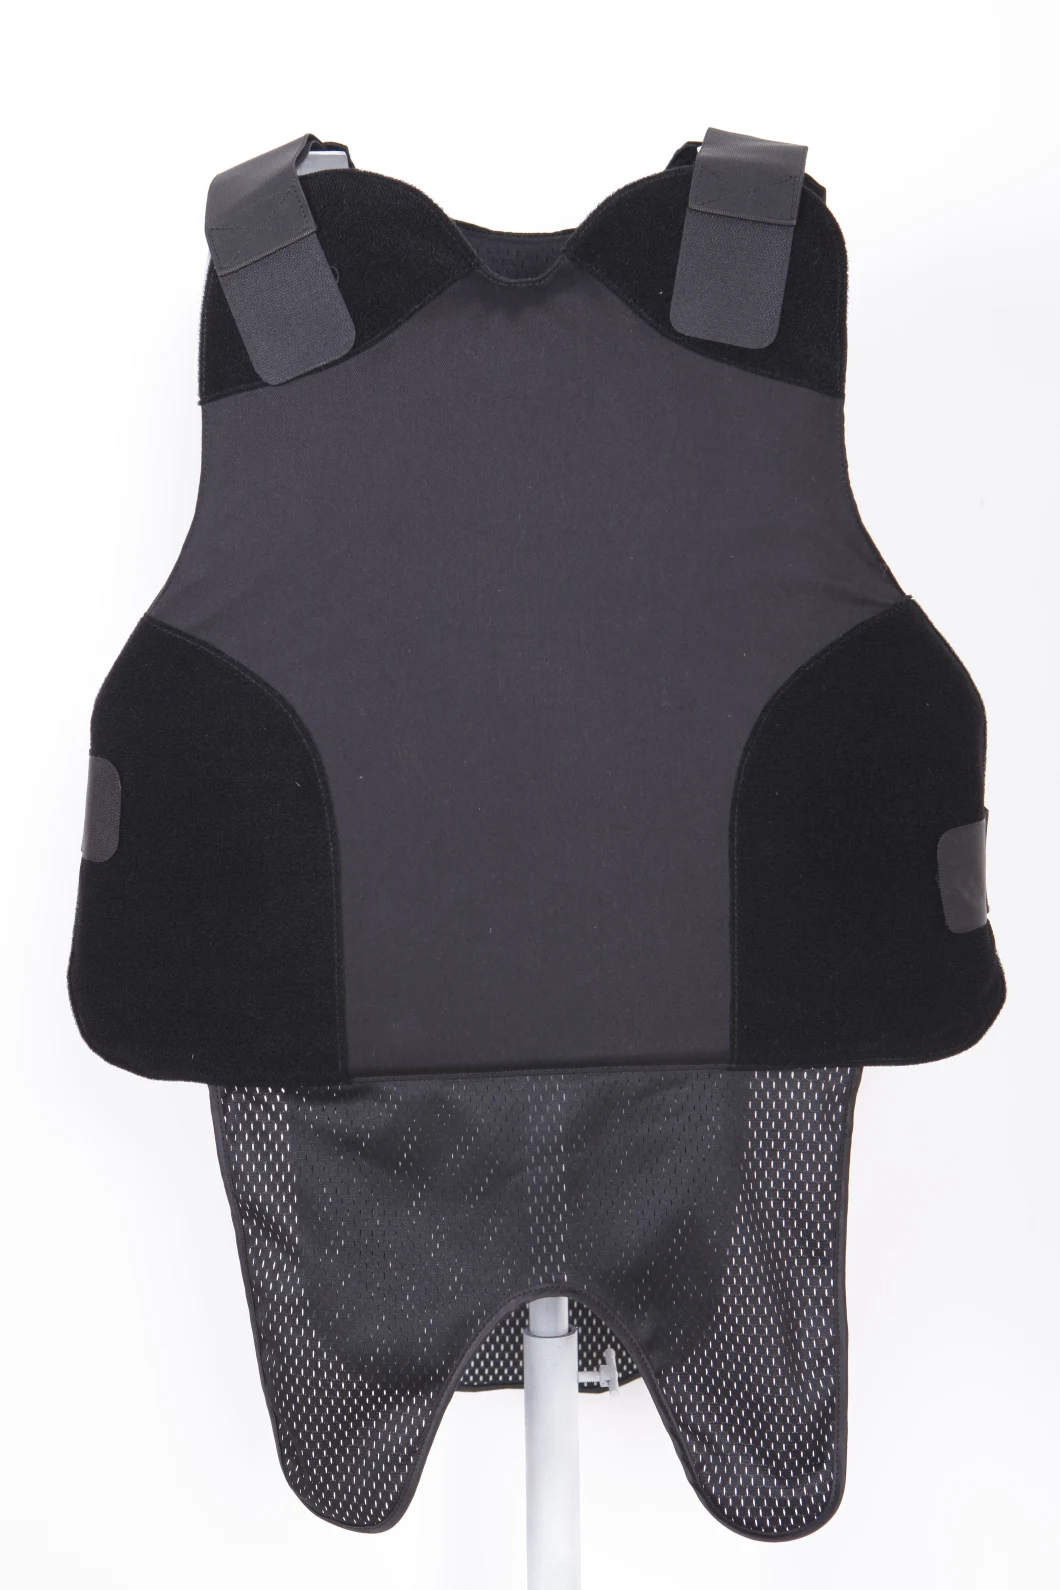 Concealable Bulletproof Vest Covert Body Armour